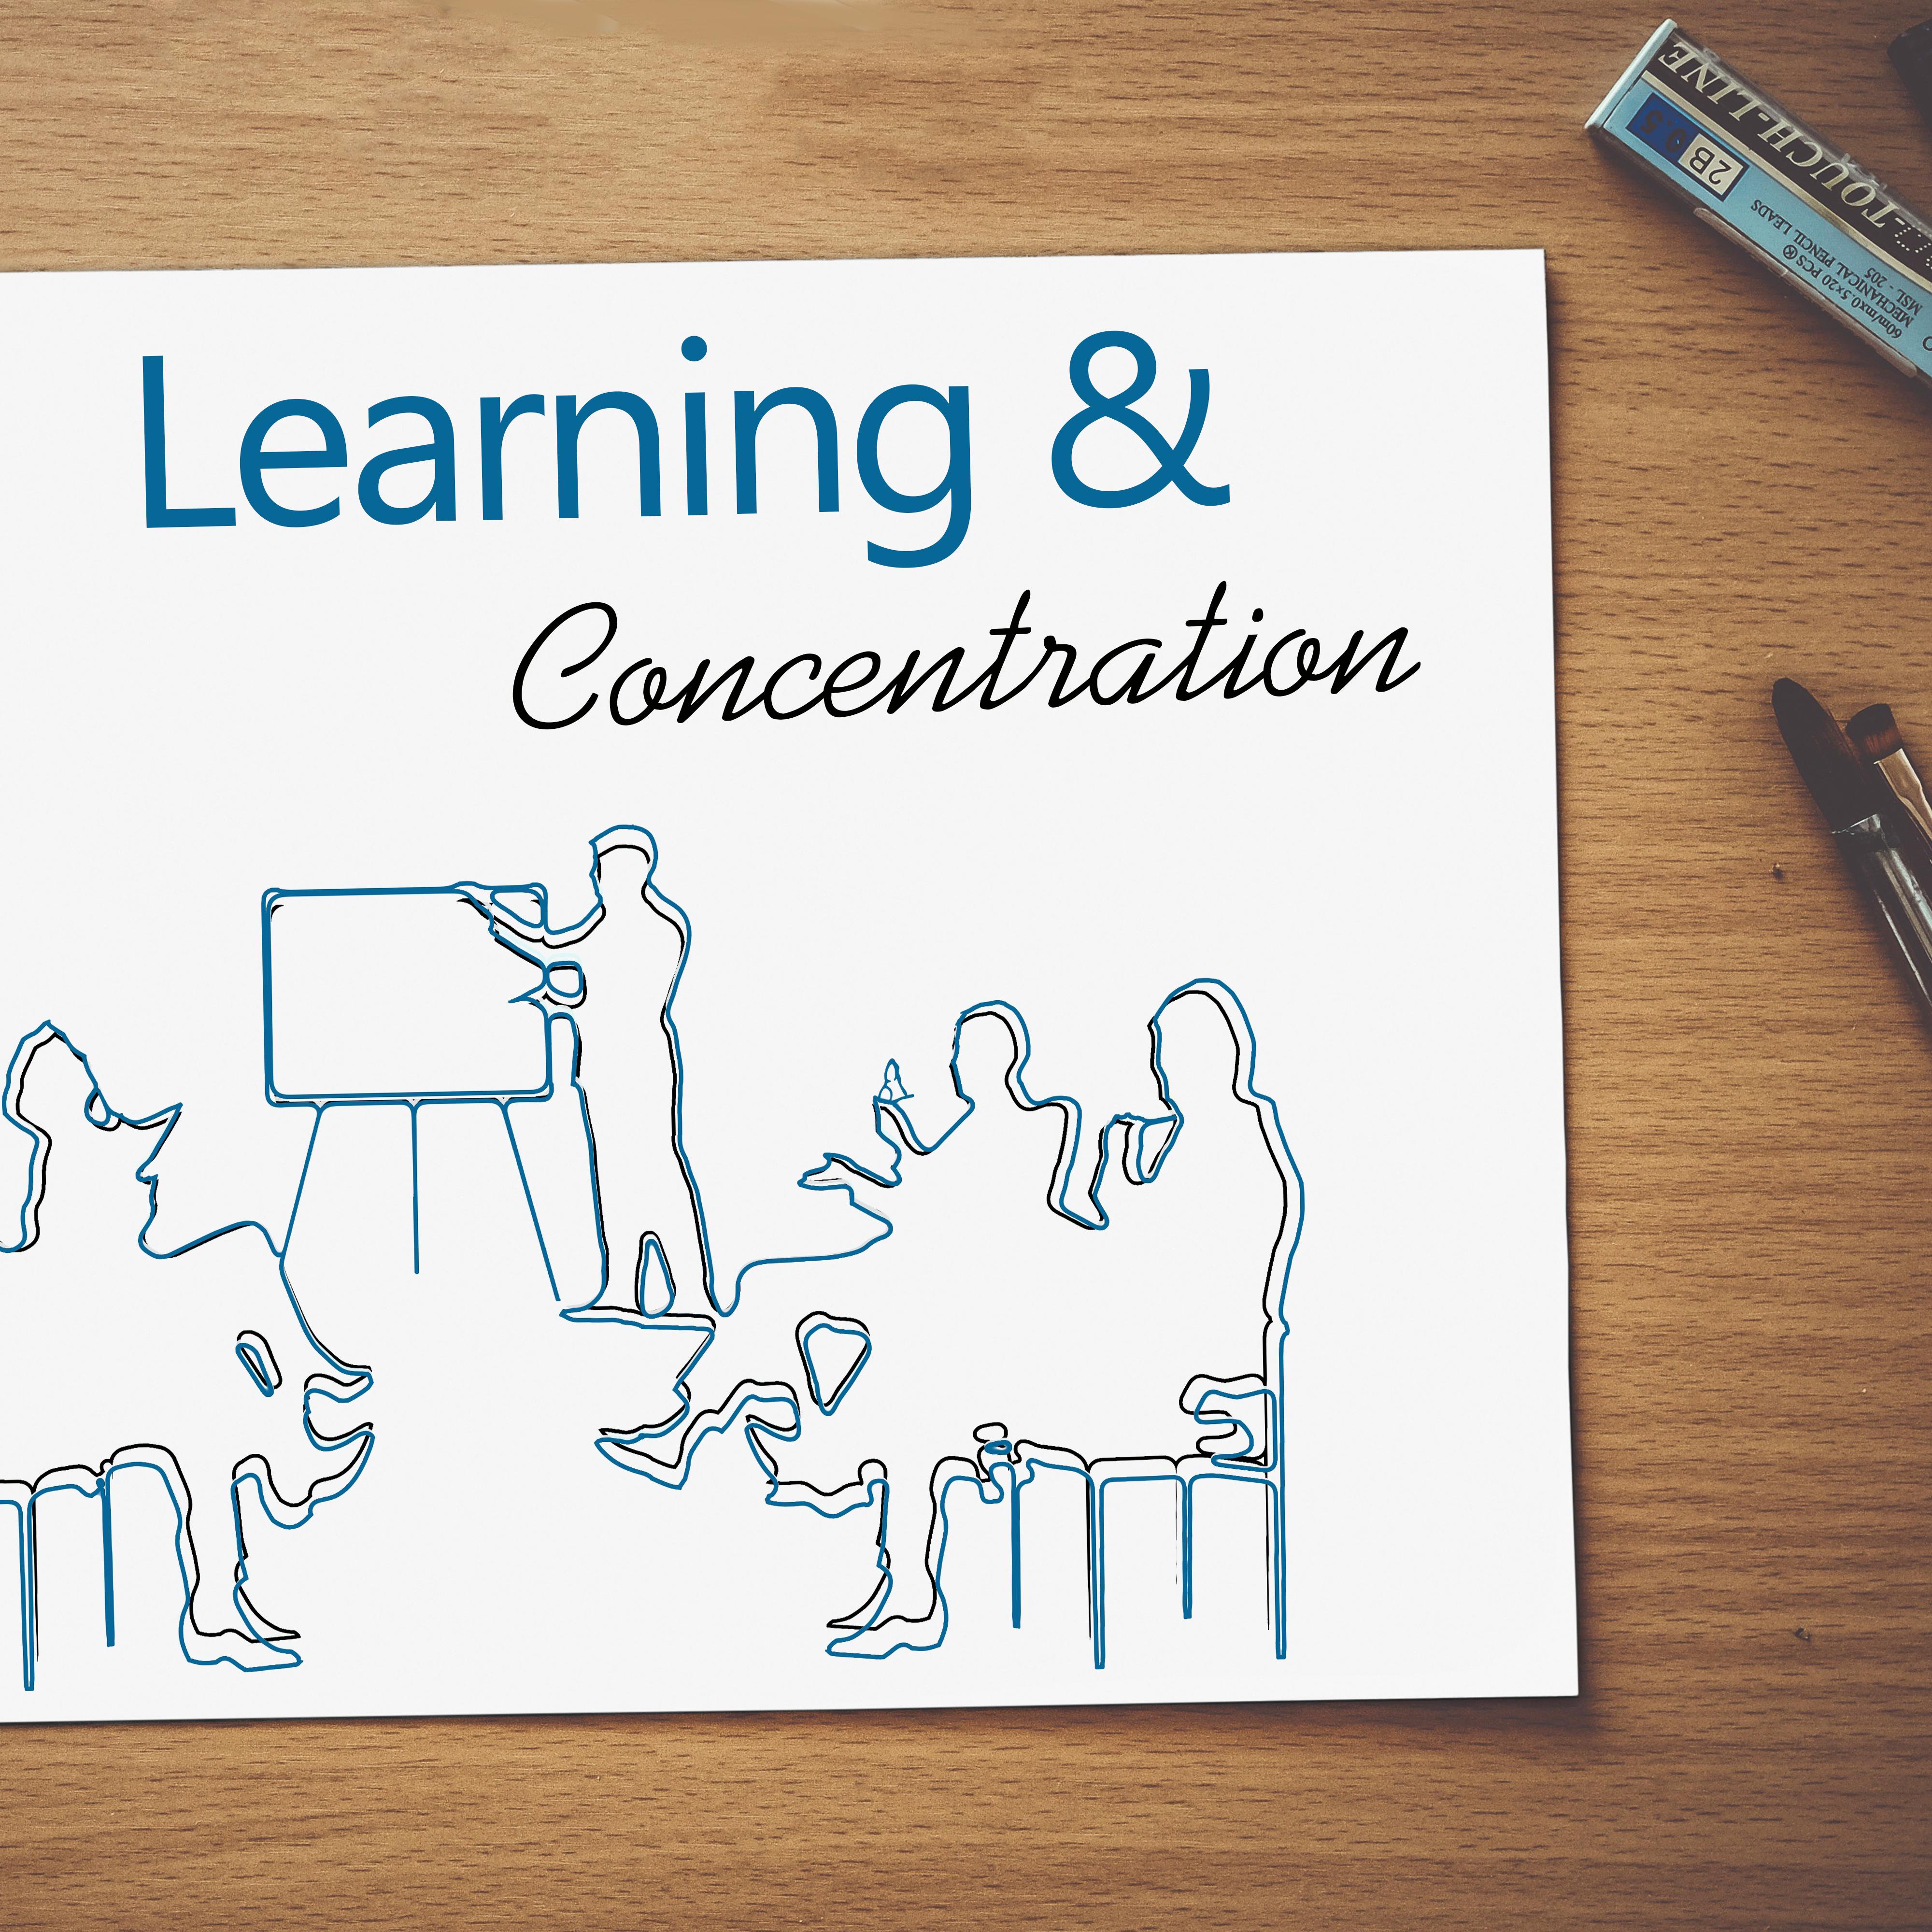 Learning & Concentration – Best Classical Music for Study, Easy Work, Better Memory, Mozart, Bach, Beethoven